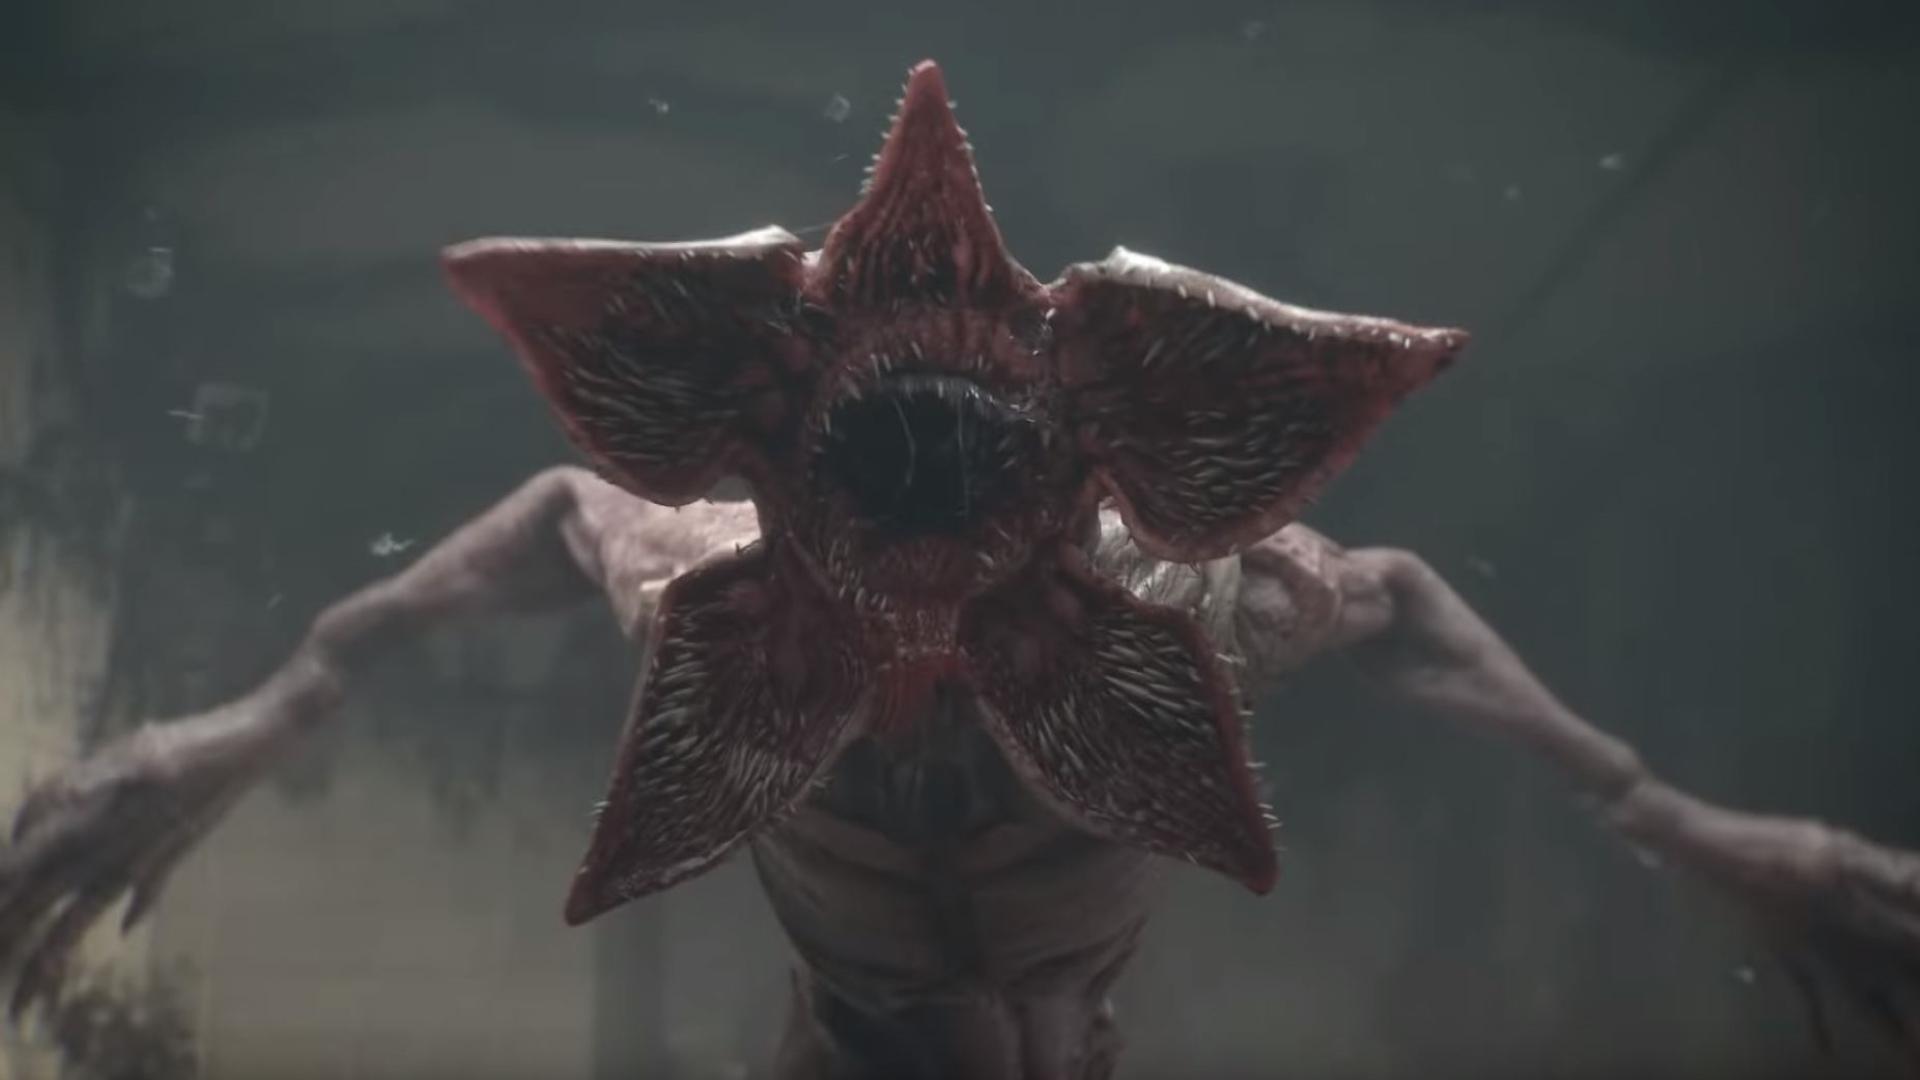 Stages of a demogorgon